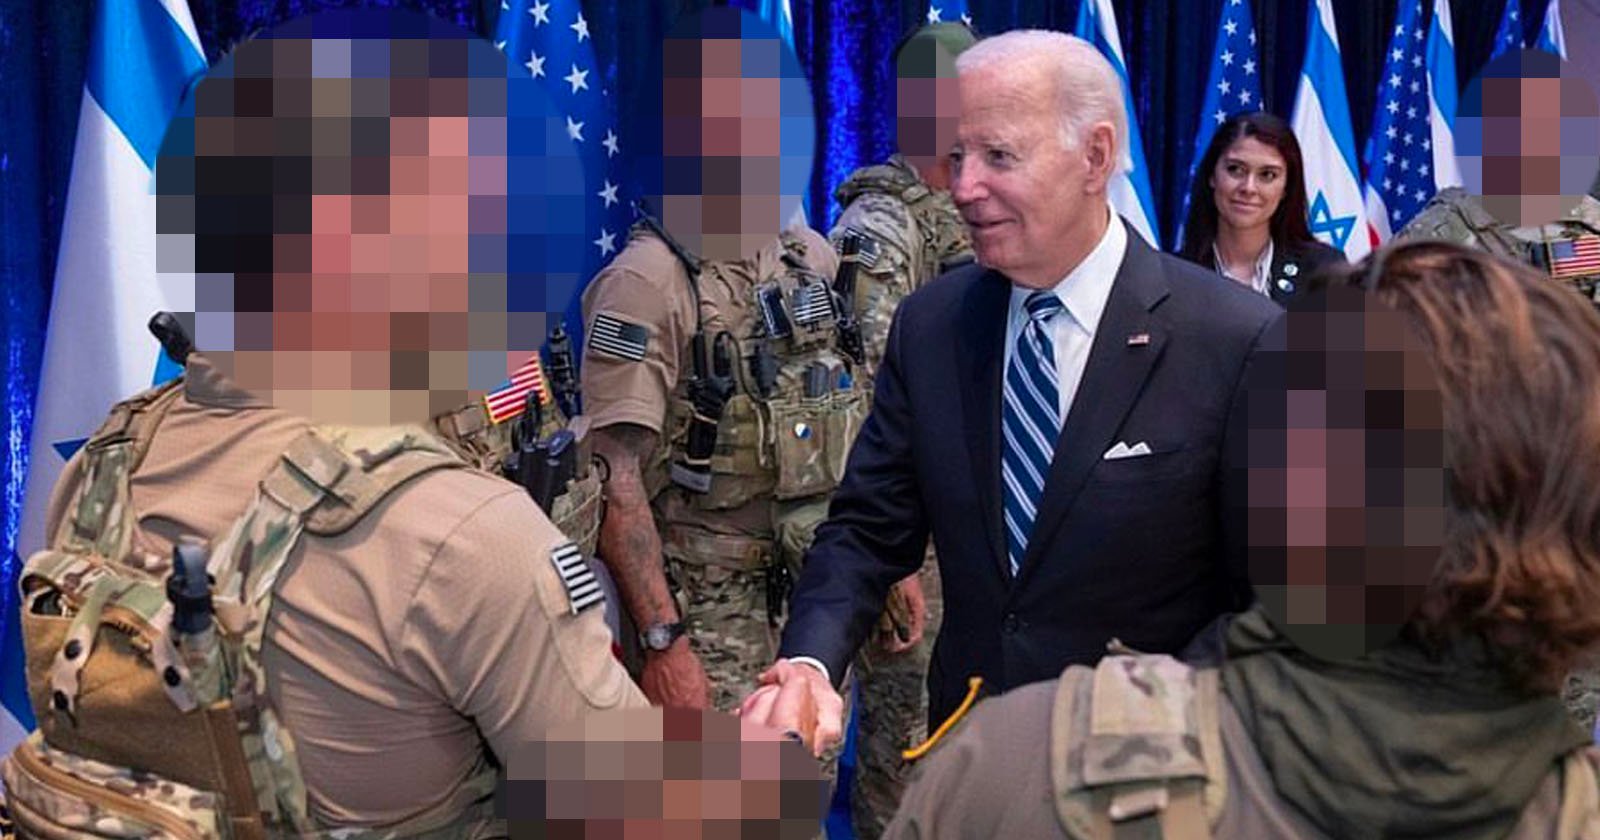 White House Accidentally Posts Photo Revealing Identity of US Special Forces